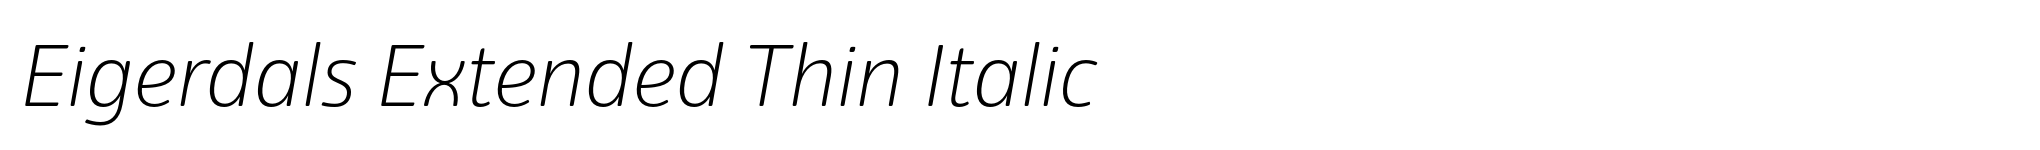 Eigerdals Extended Thin Italic image